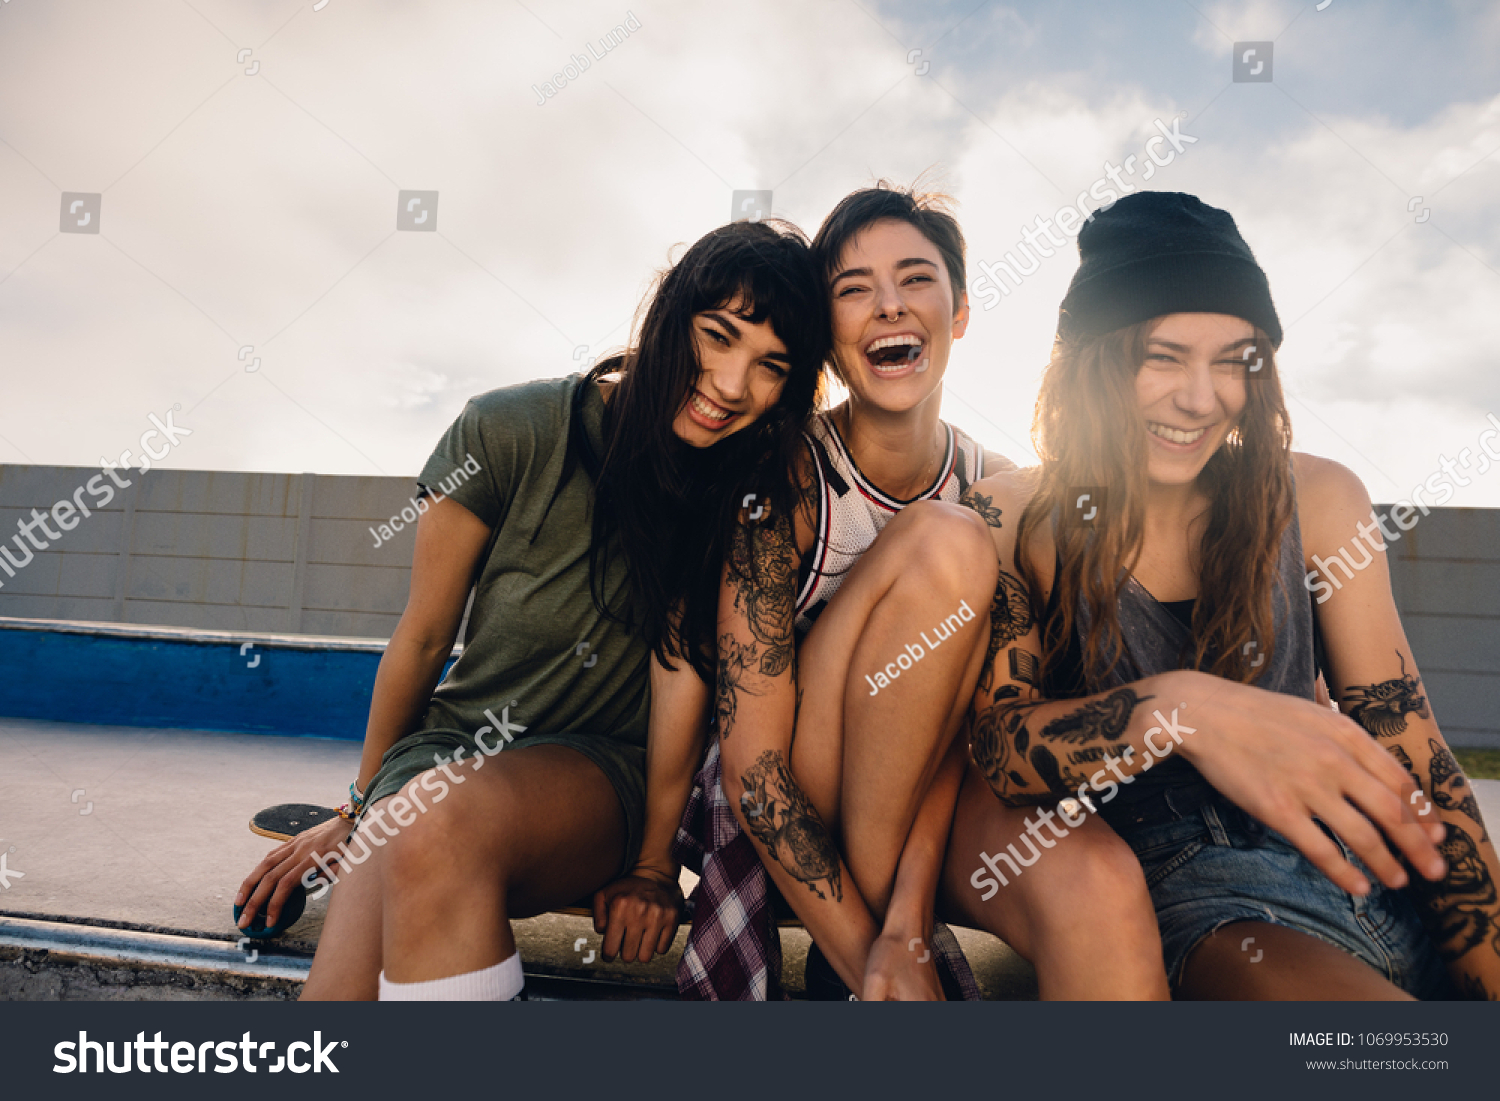 Shot of three smiling girls hanging out at skate park. Group of women friends sitting outdoors at skate park and laughing. #1069953530